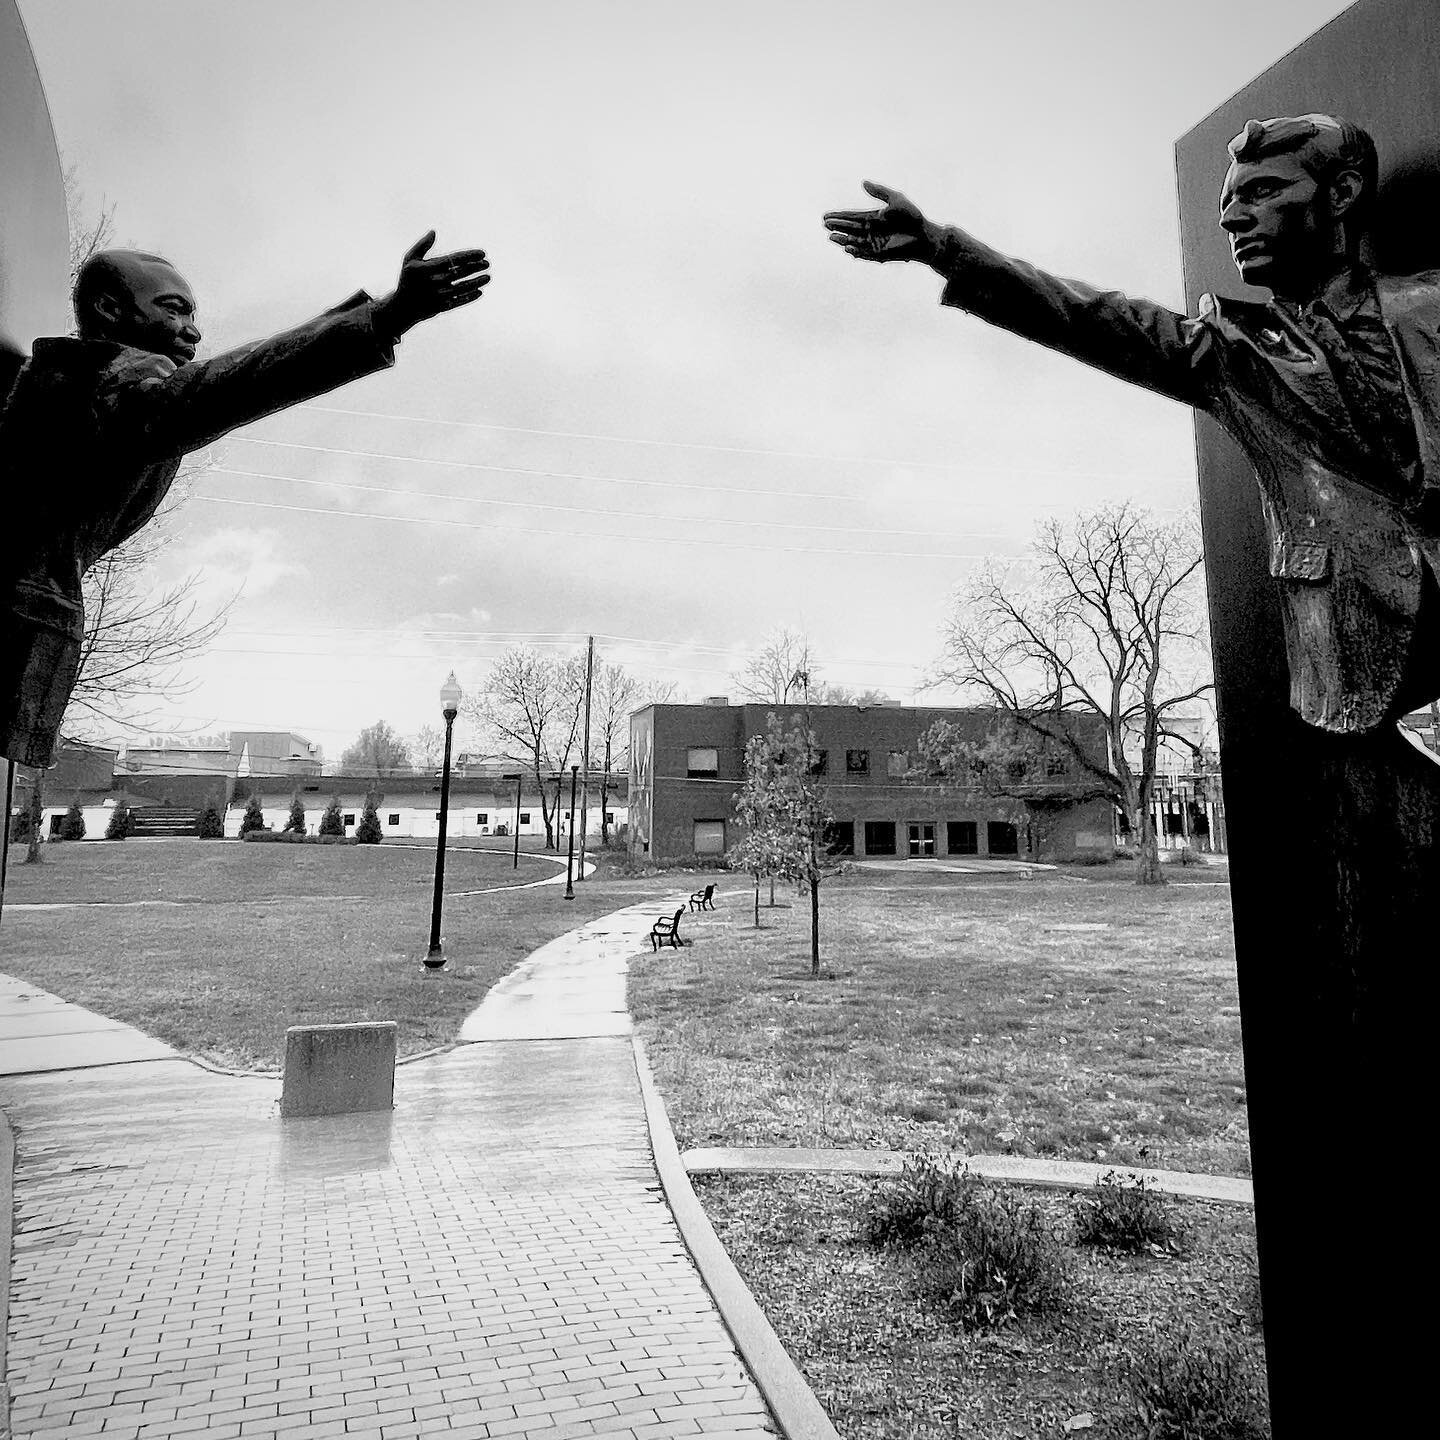 Last year, while driving through Indianapolis for work, I took a few minutes to visit a place I&rsquo;ve always wanted to see. 

Early in his political career, Robert Kennedy disagreed with Martin Luther King Jr. and the tactics he employed in the Ci